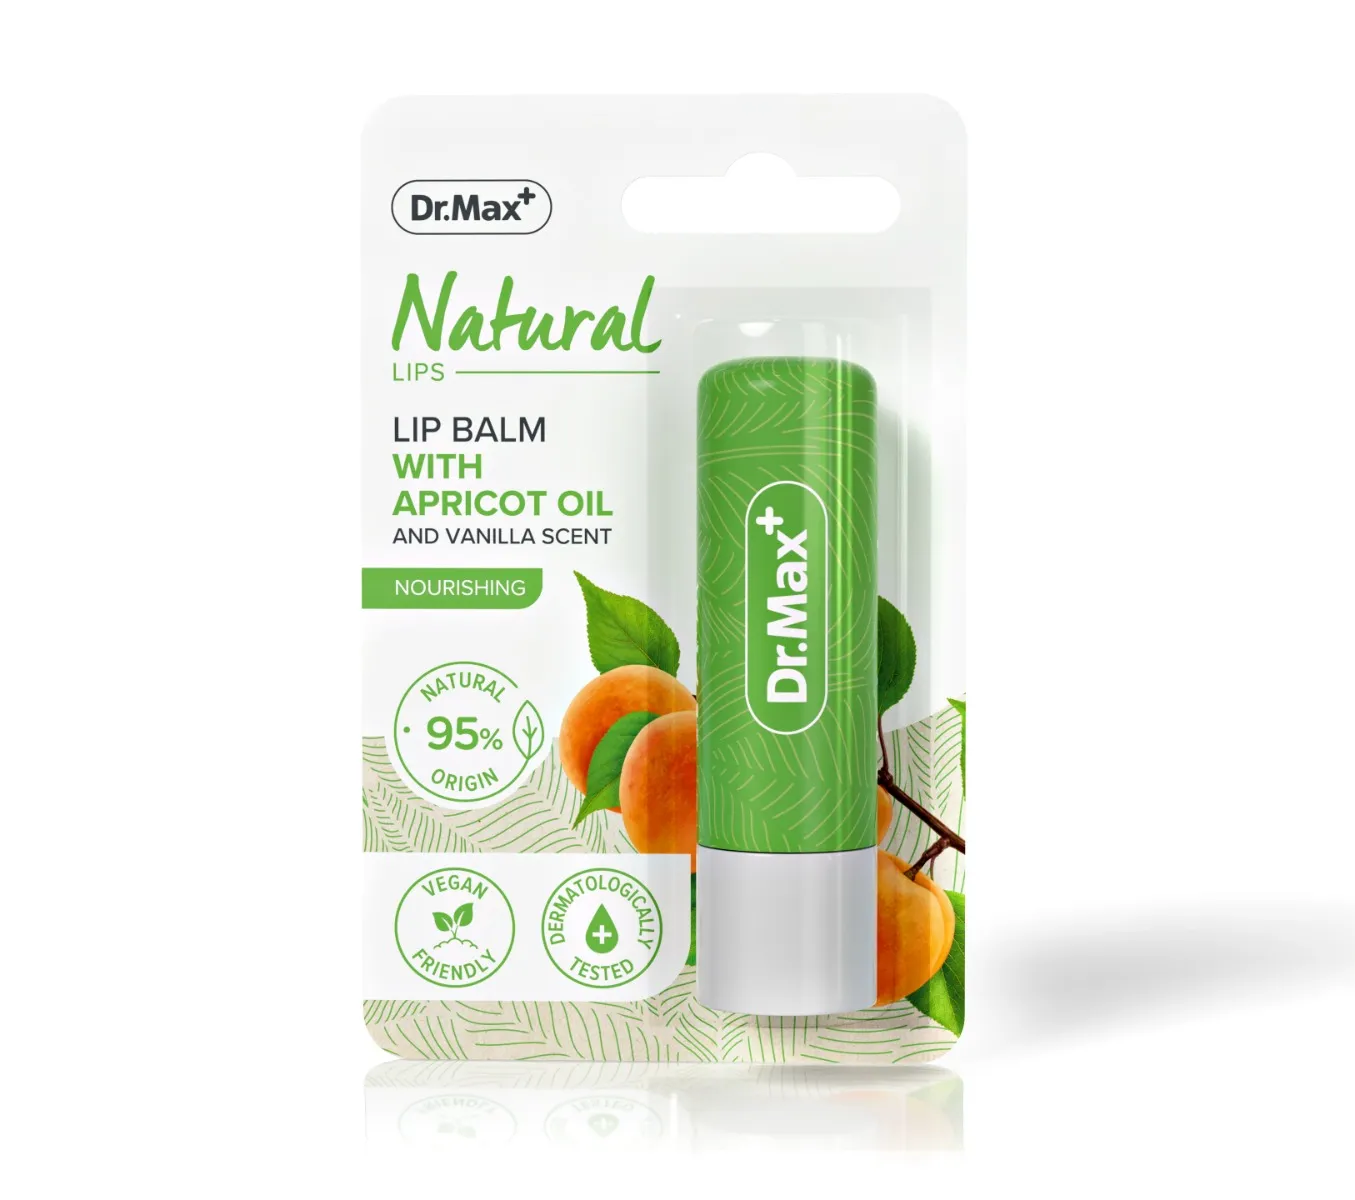 Dr.Max Natural Lip Balm with Apricot Oil